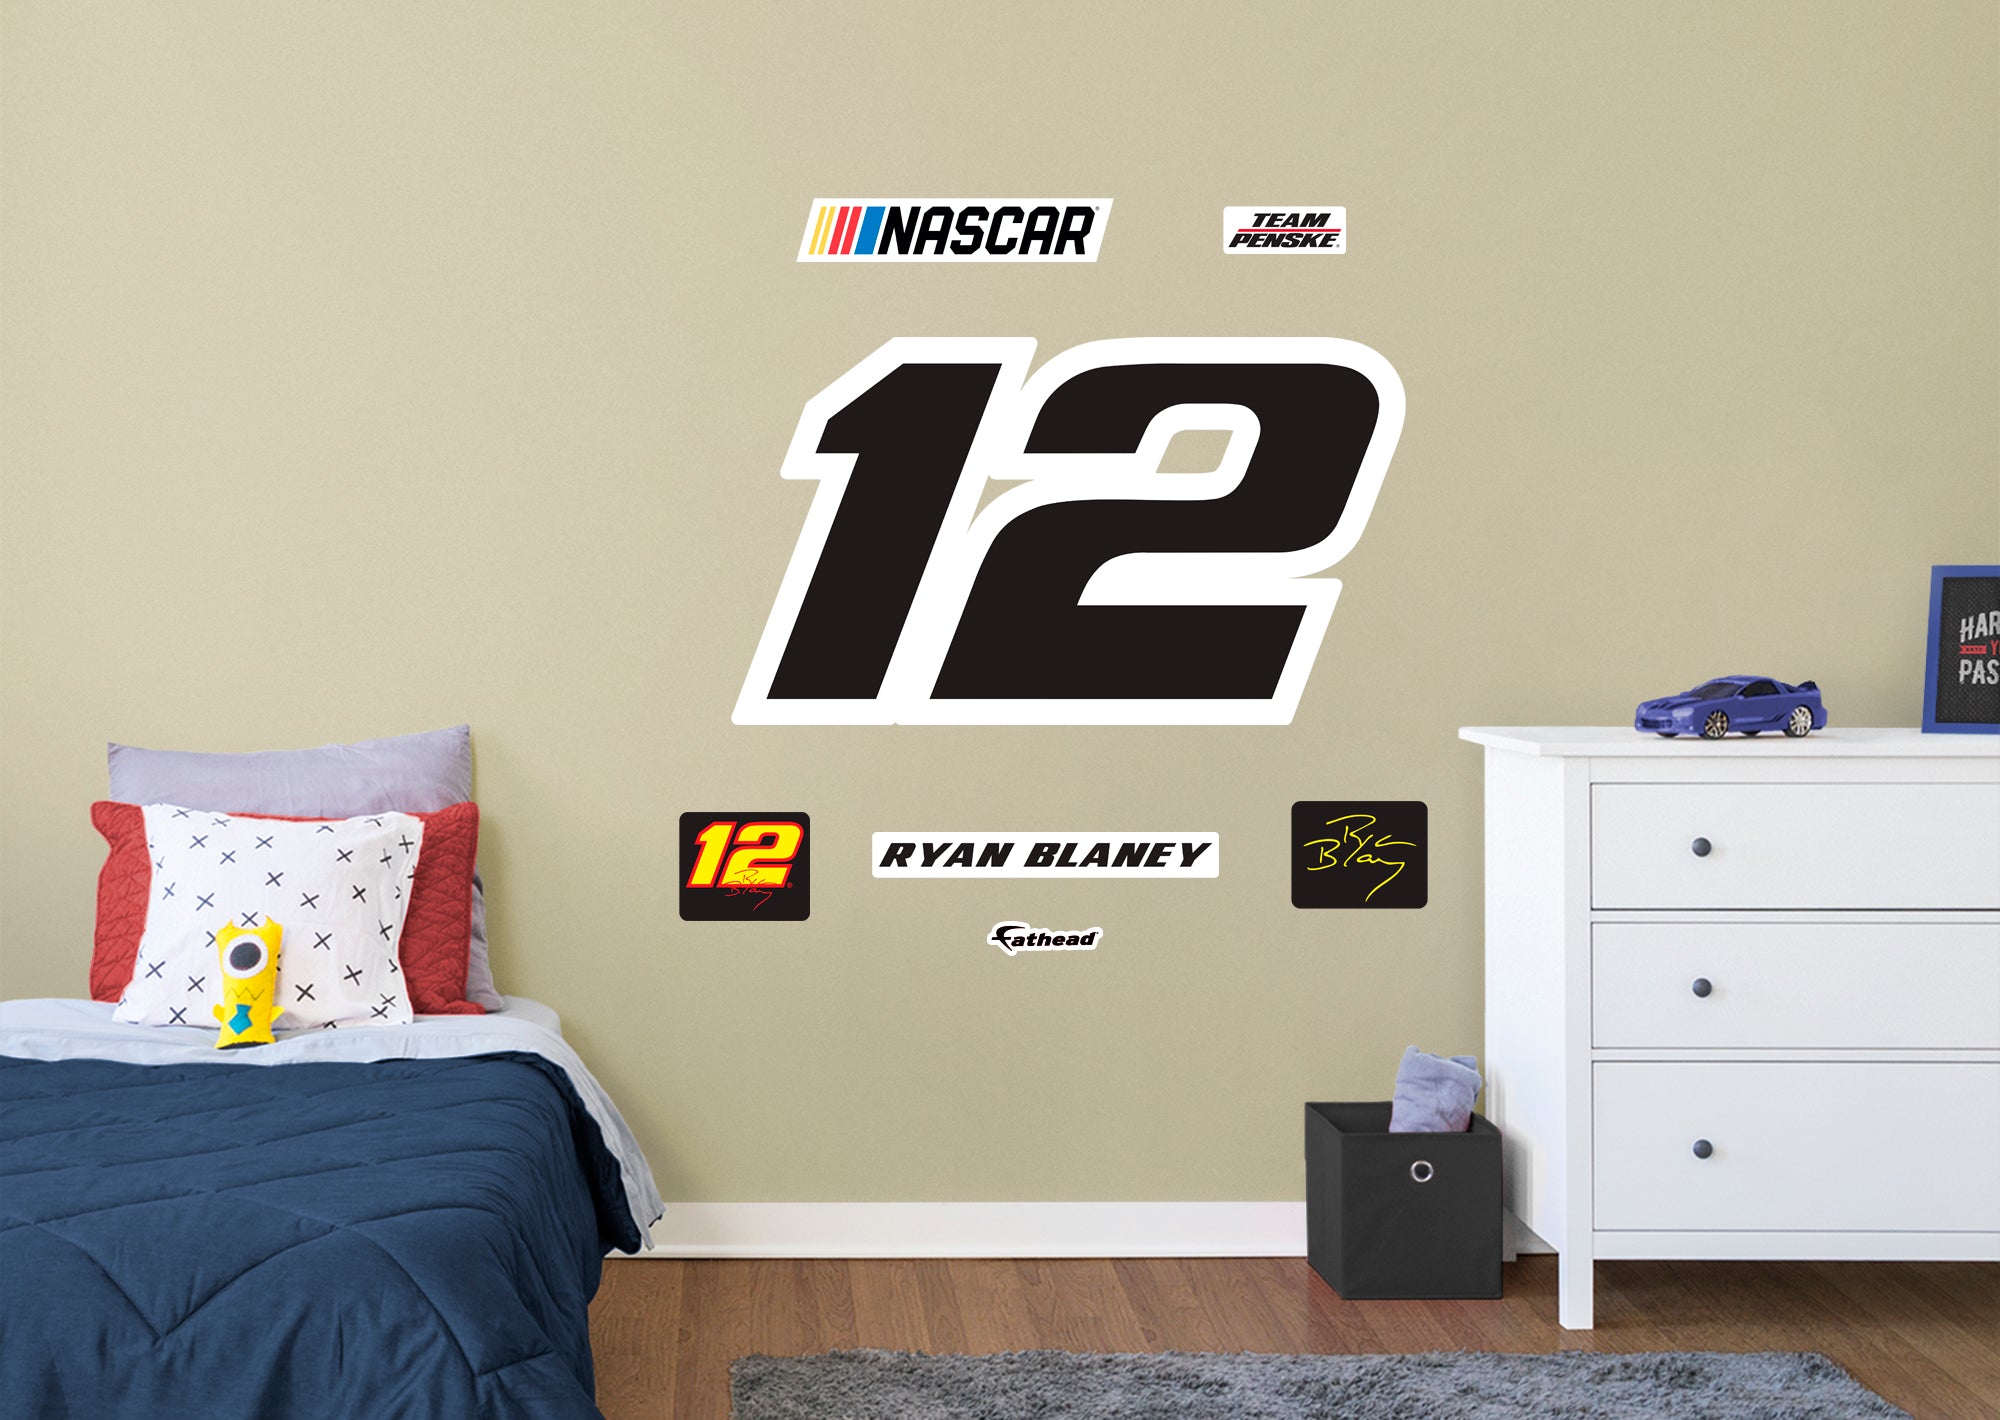 Ryan Blaney 2021 #12 Logo - Officially Licensed NASCAR Removable Wall Decal Giant Logo + 6 Decals (51"W x 28"H) by Fathead | Vin